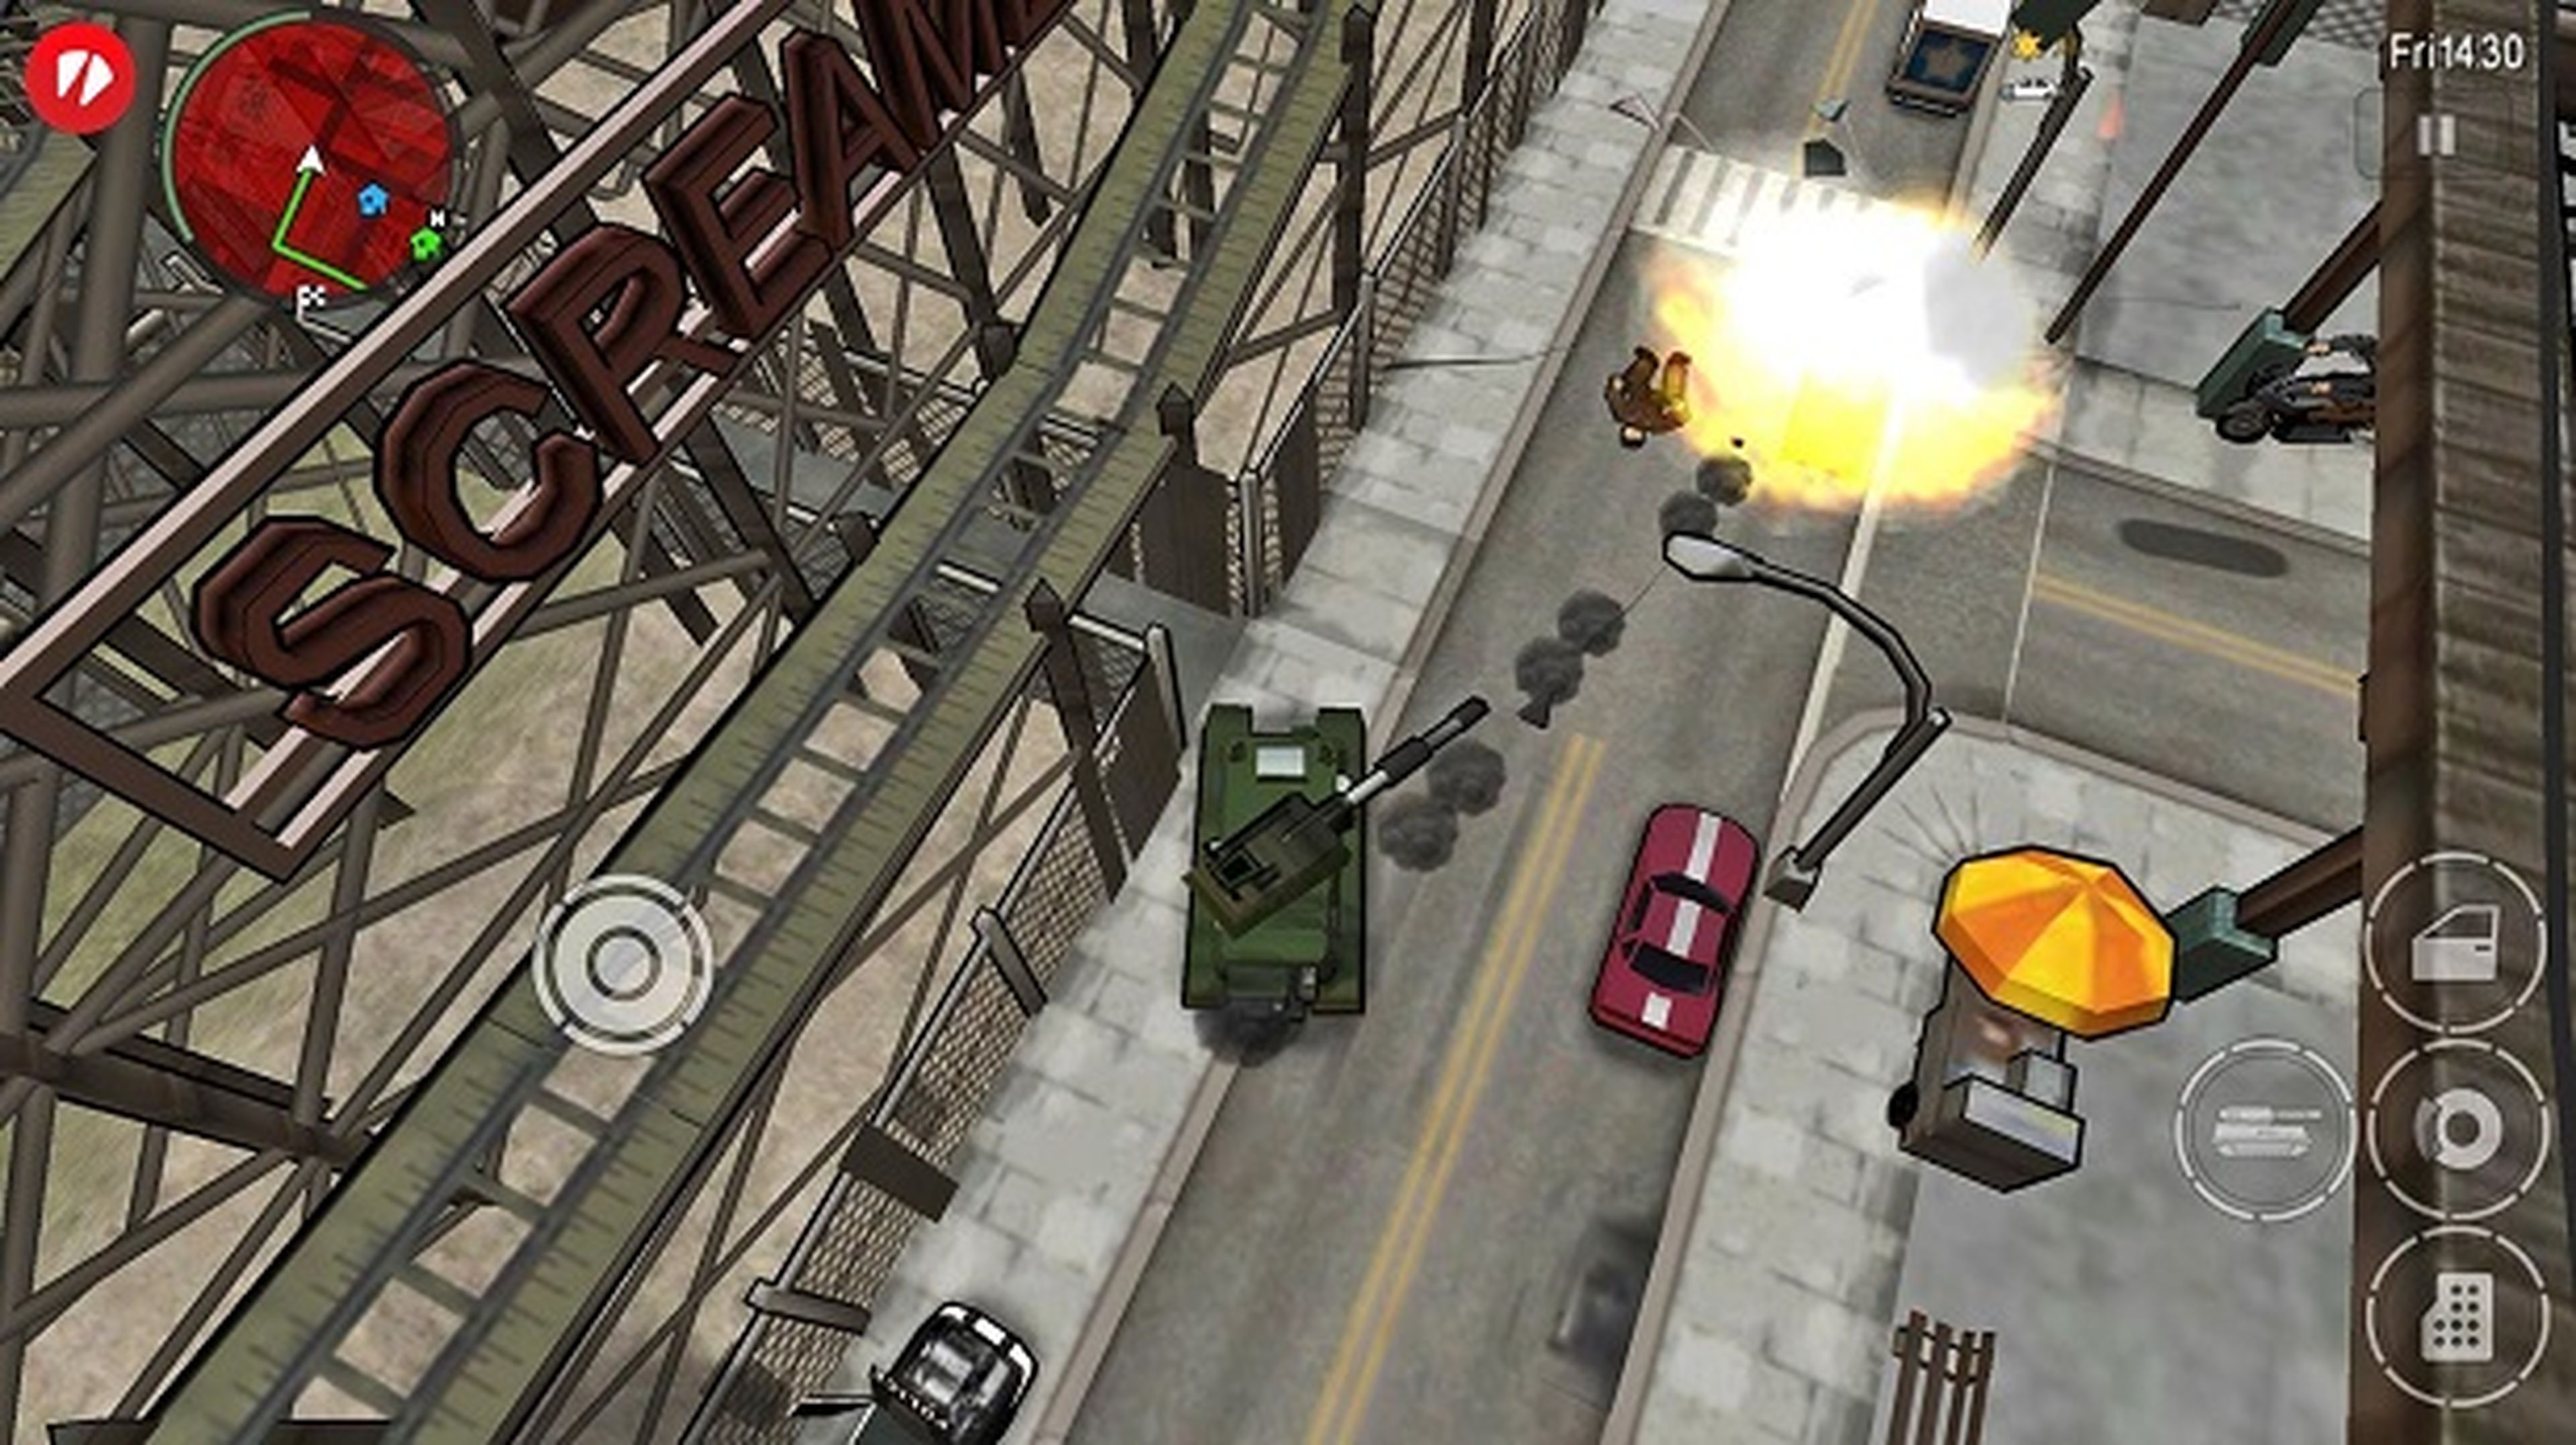 Grand Theft Auto: China Town Wars llega a Android